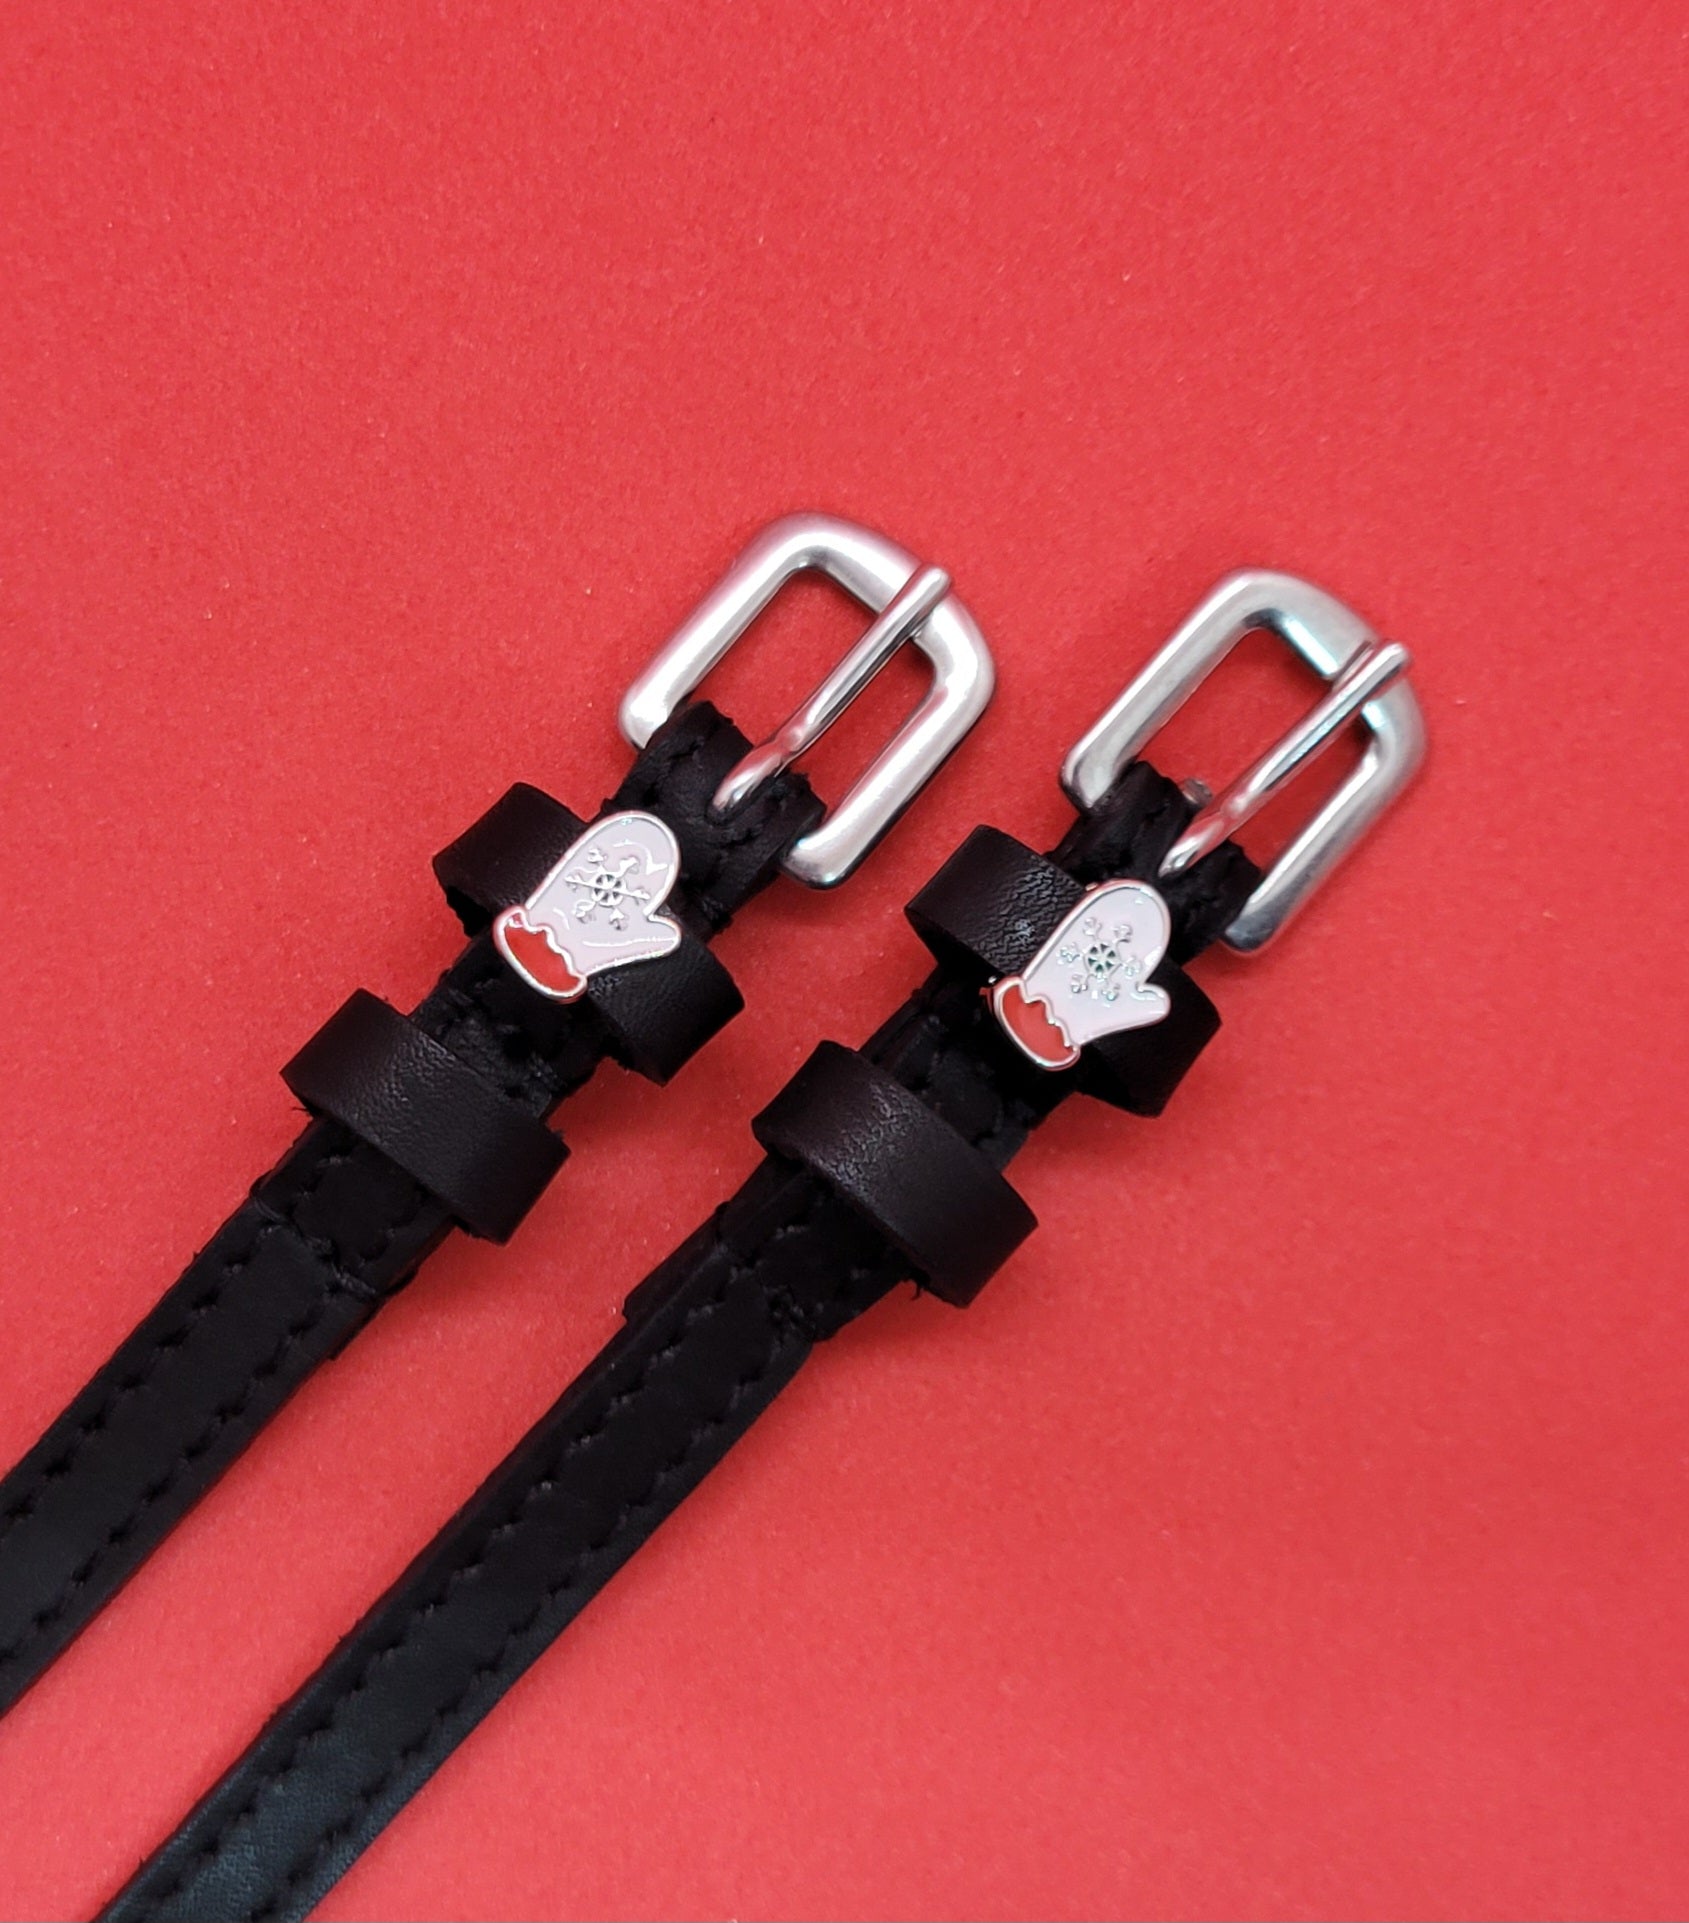 ManeJane Spur Straps With Holiday Charms